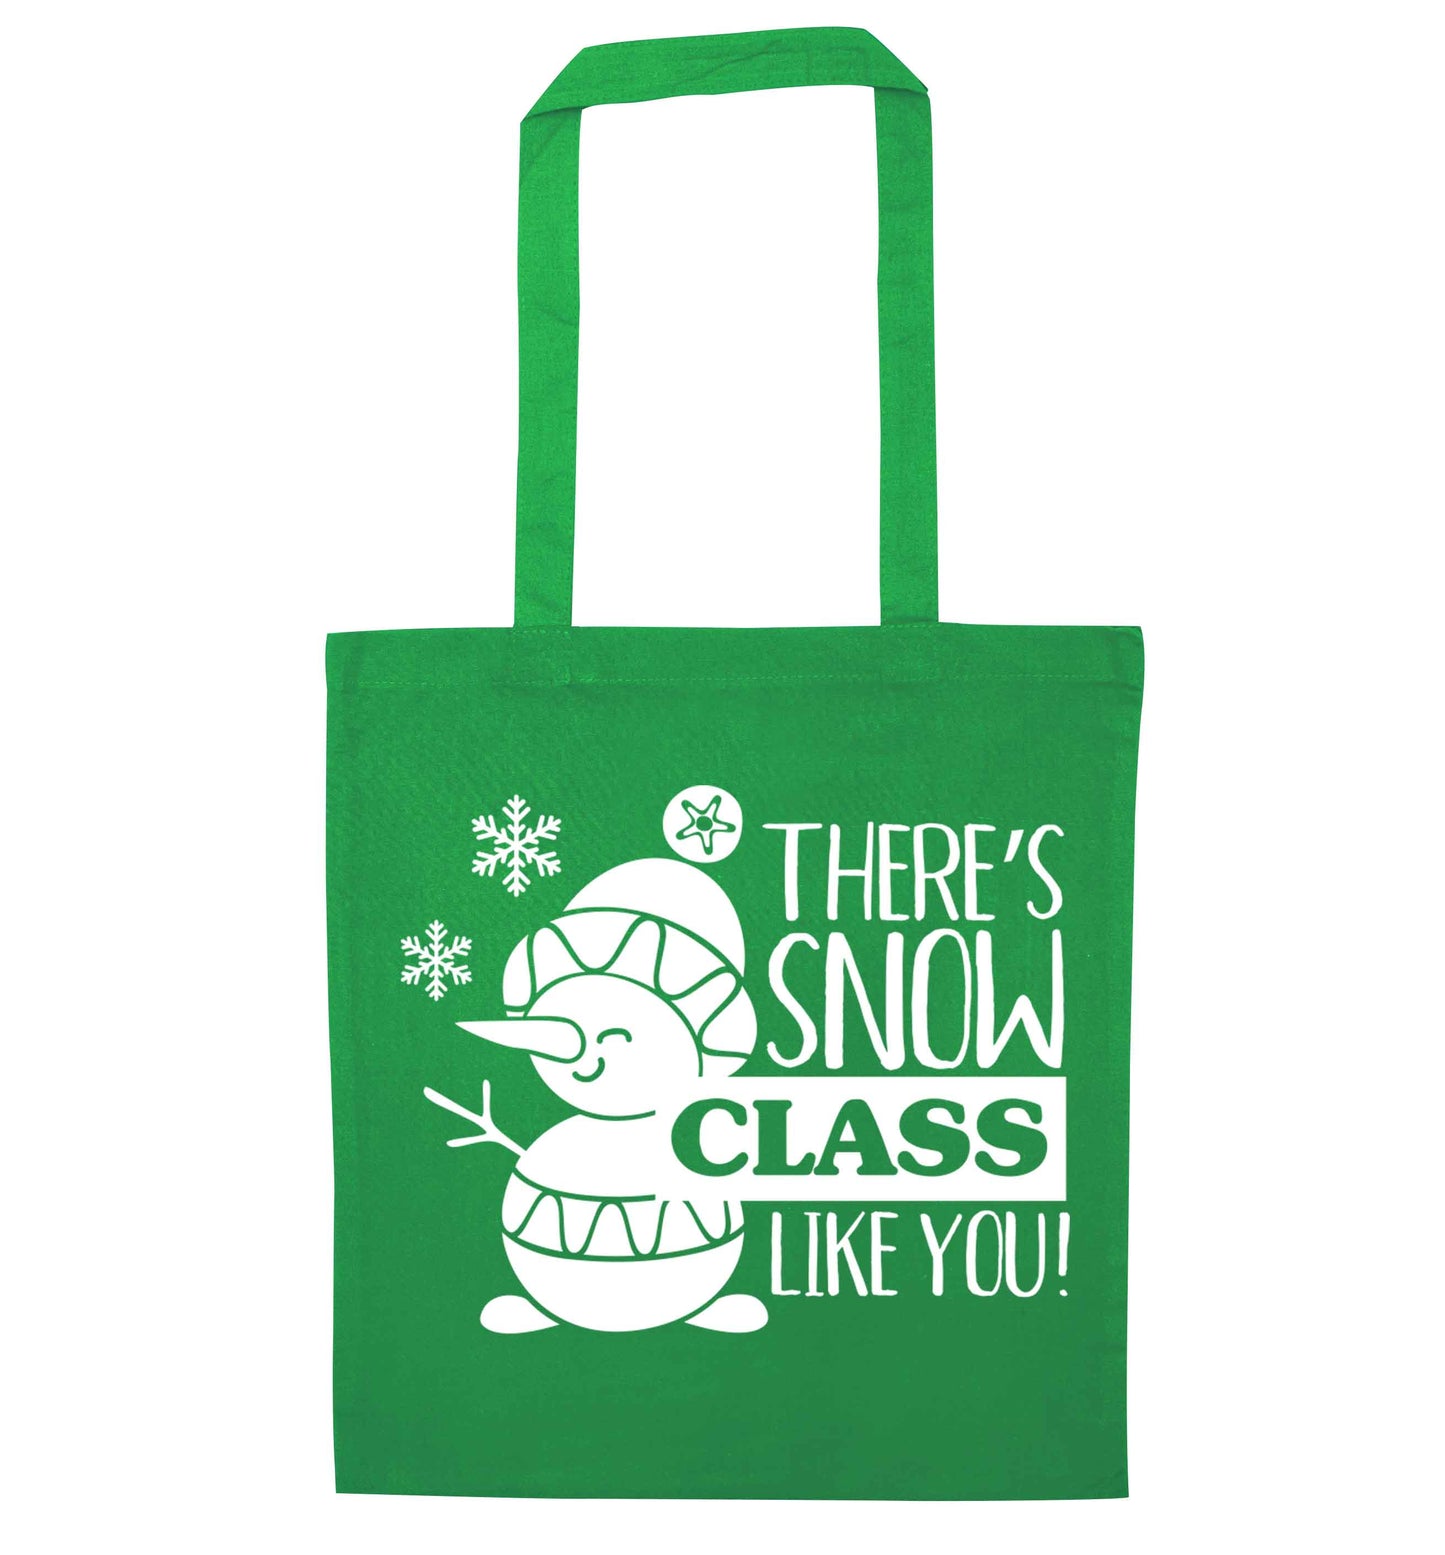 There's snow class like you green tote bag